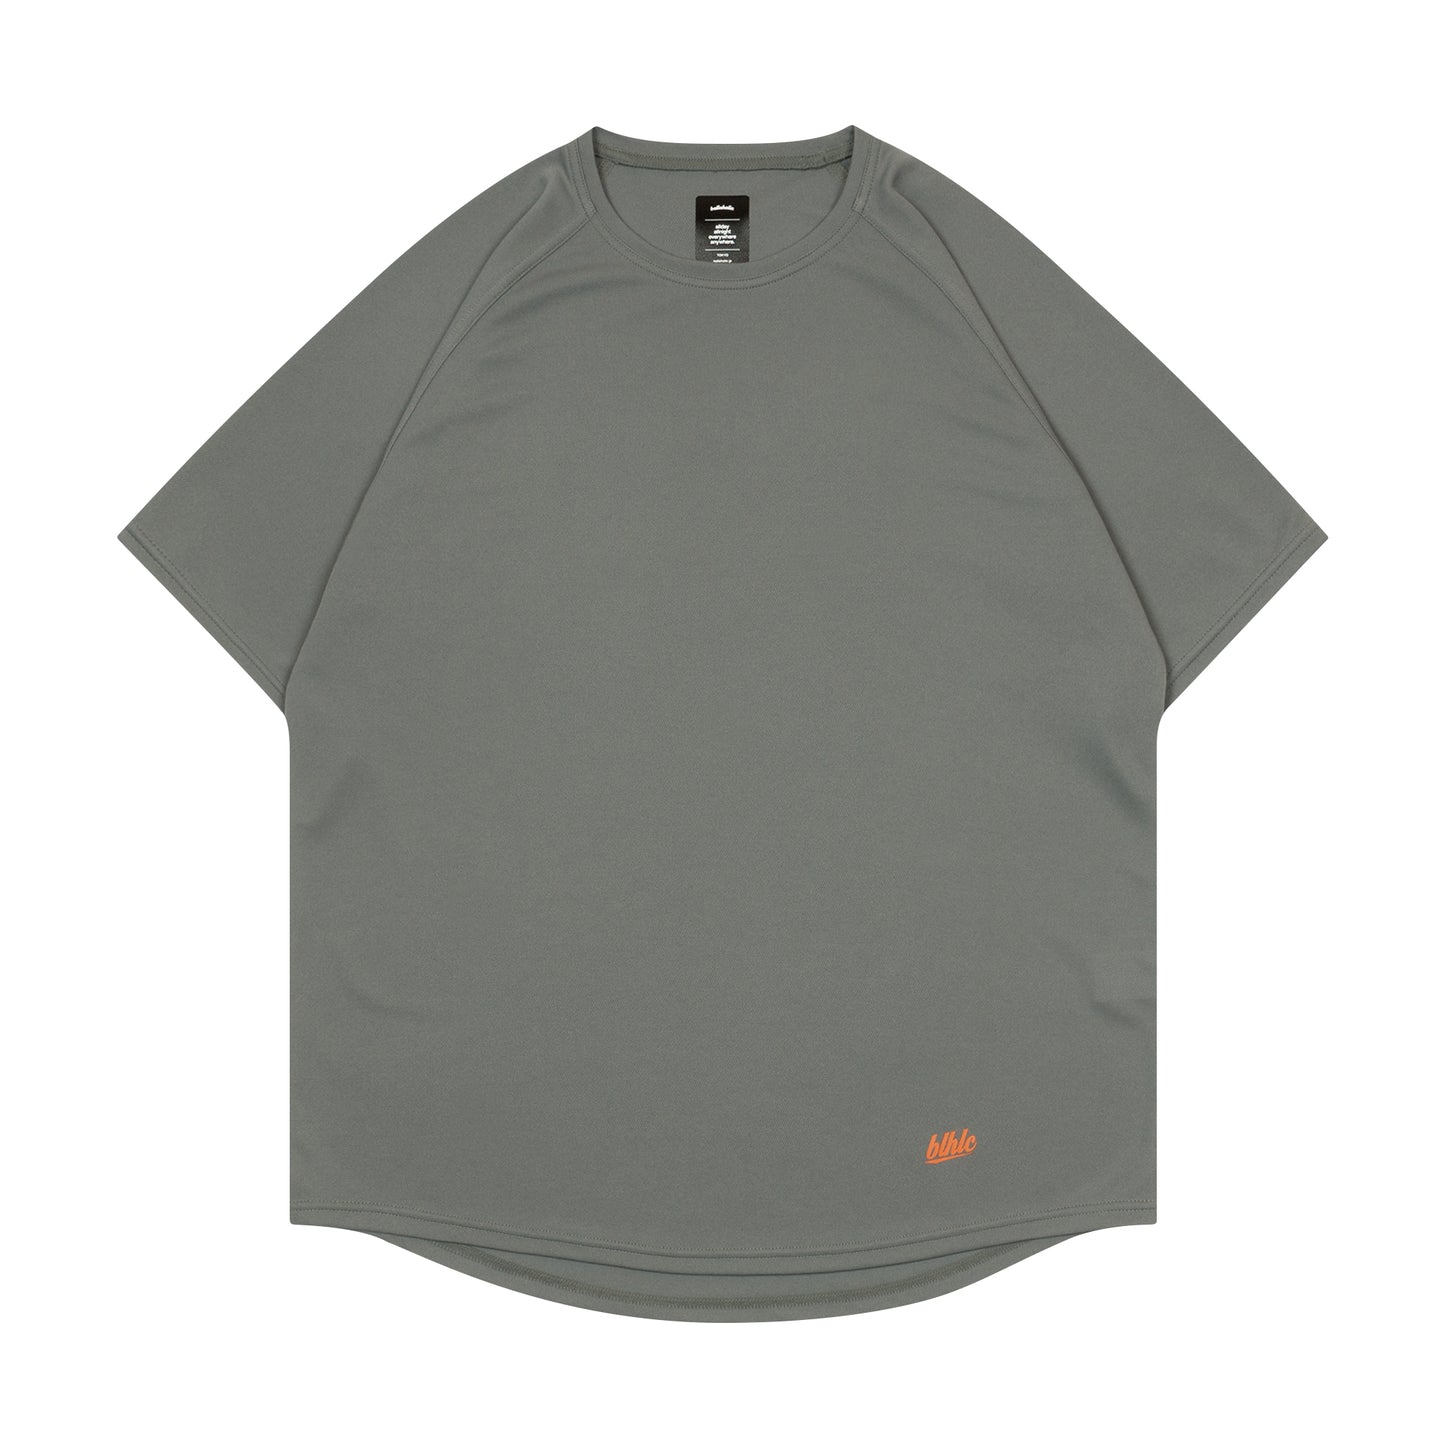 blhlc Back Print Cool Tee (charcoal gray/east)